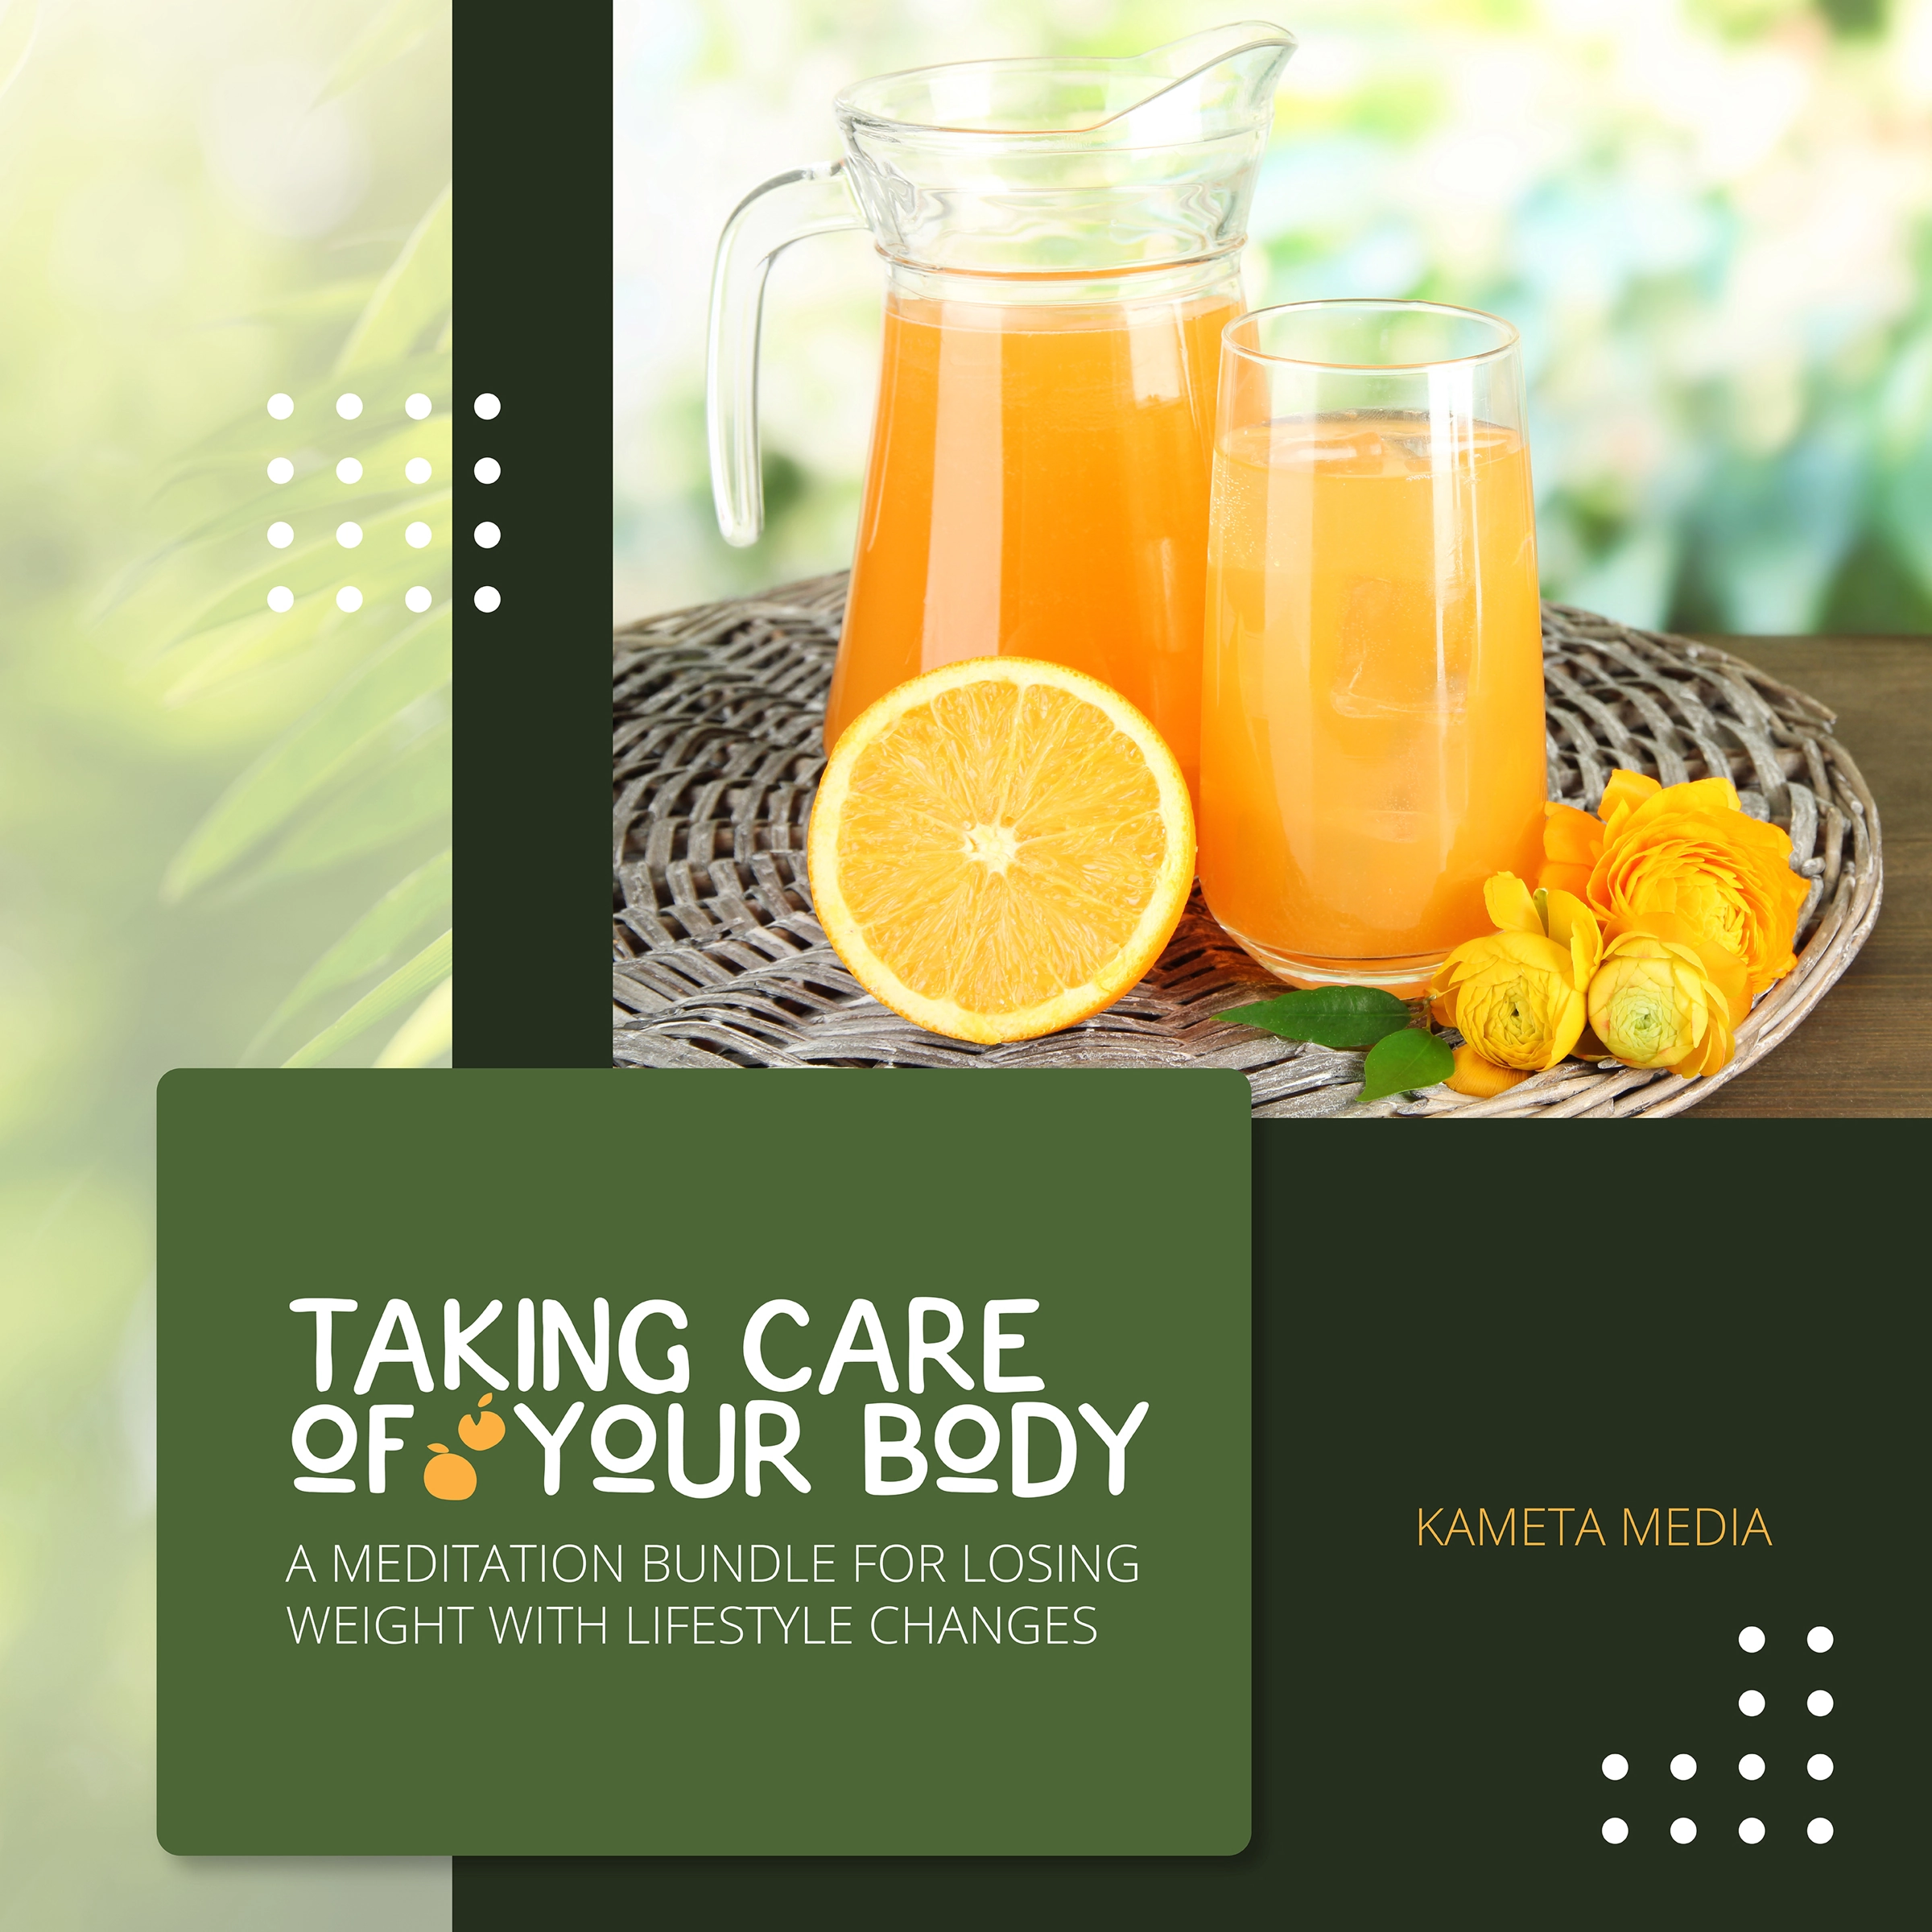 Taking Care of Your Body: A Meditation Bundle for Losing Weight with Lifestyle Changes Audiobook by Kameta Media